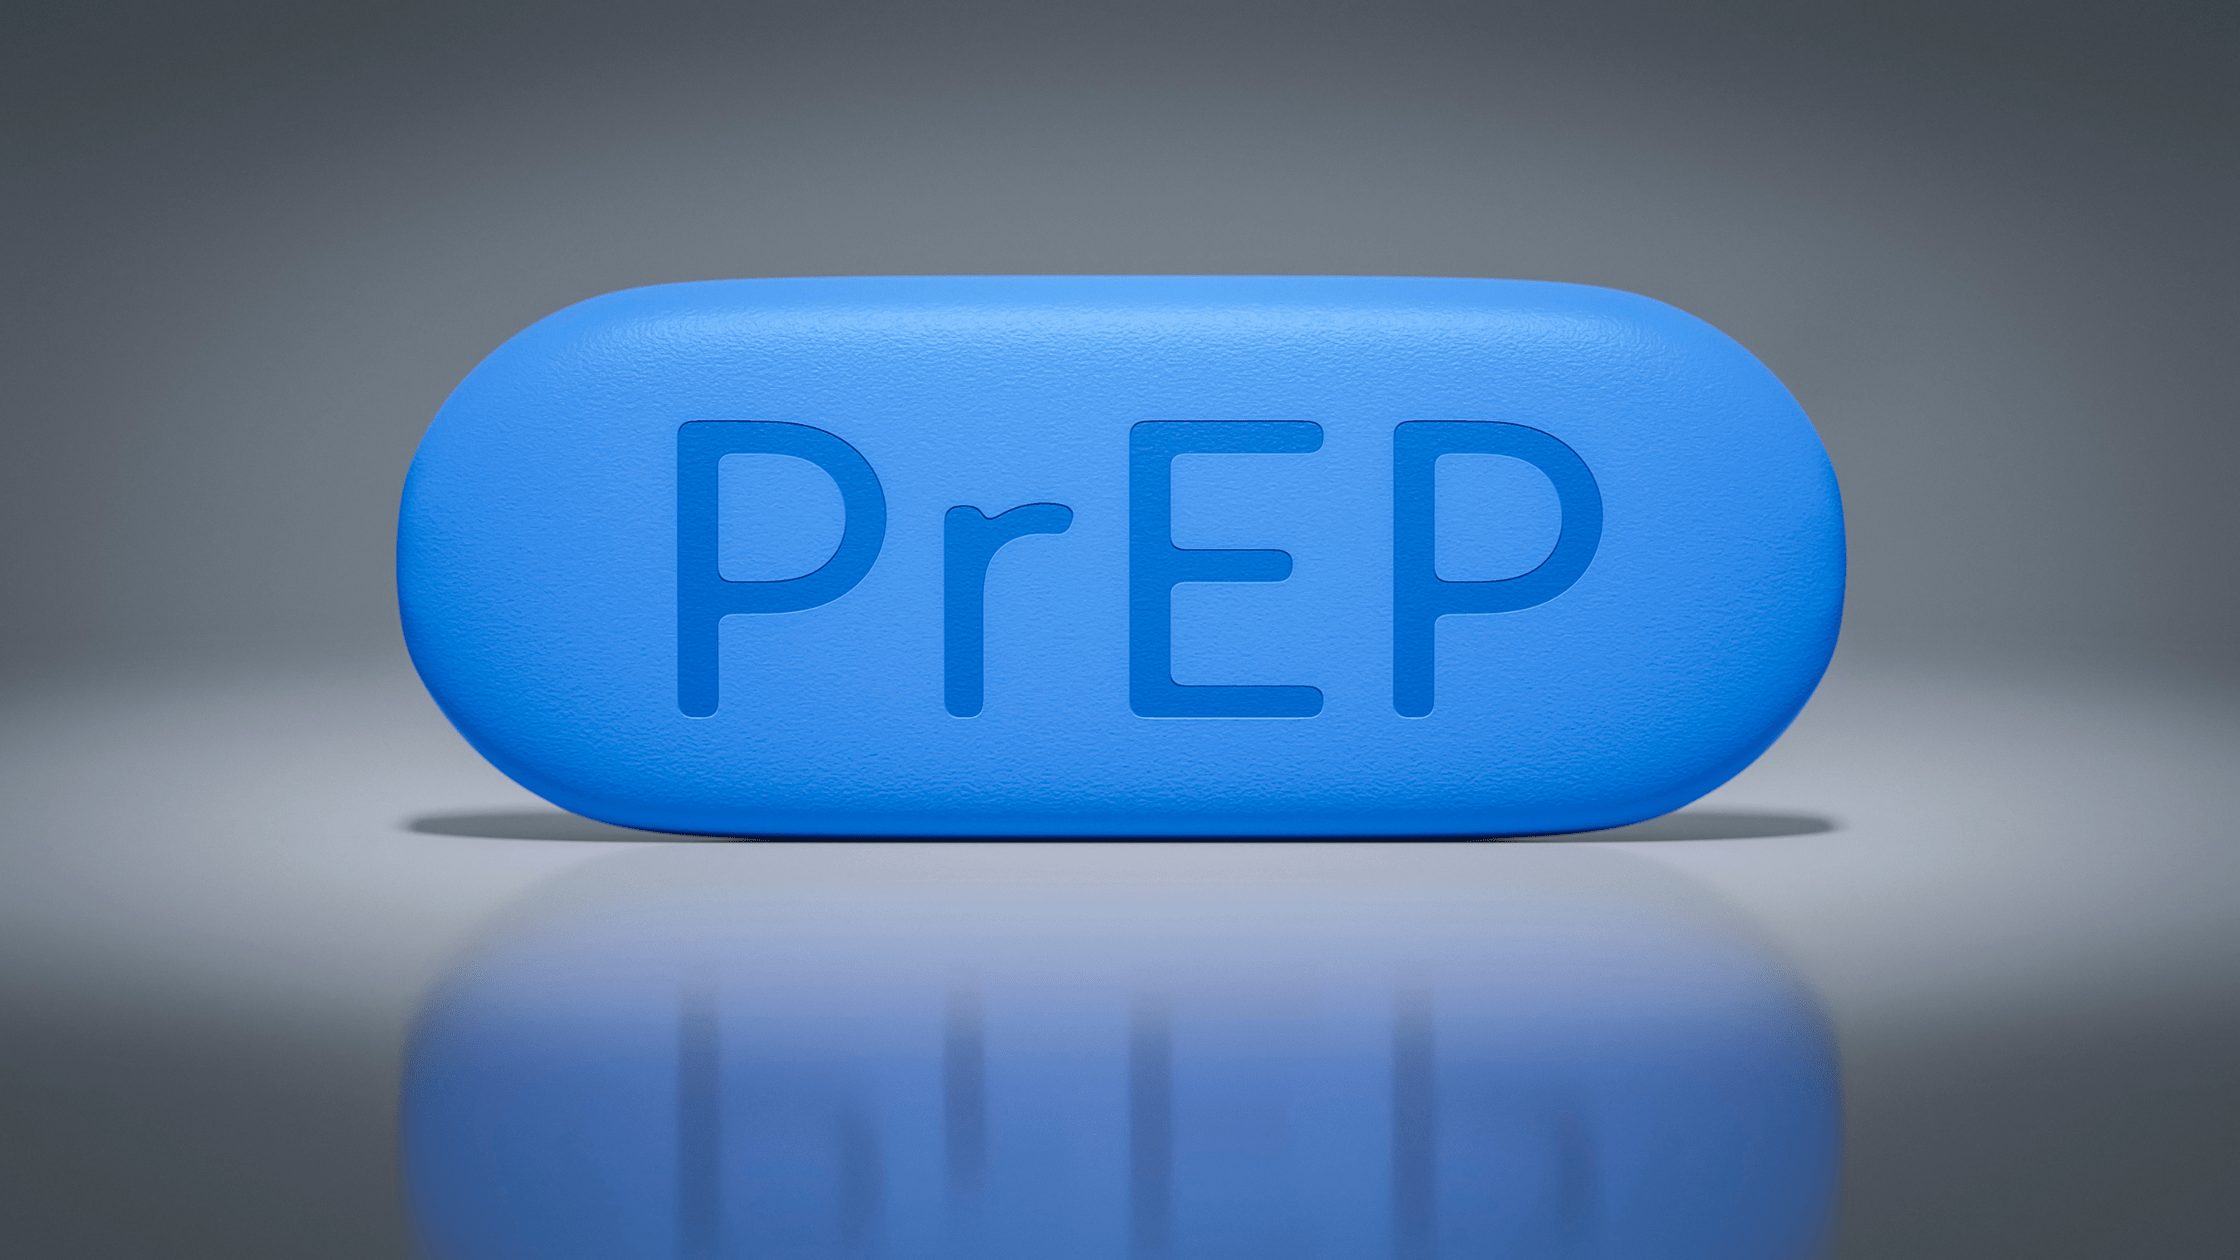 Accessing PrEP During COVID-19